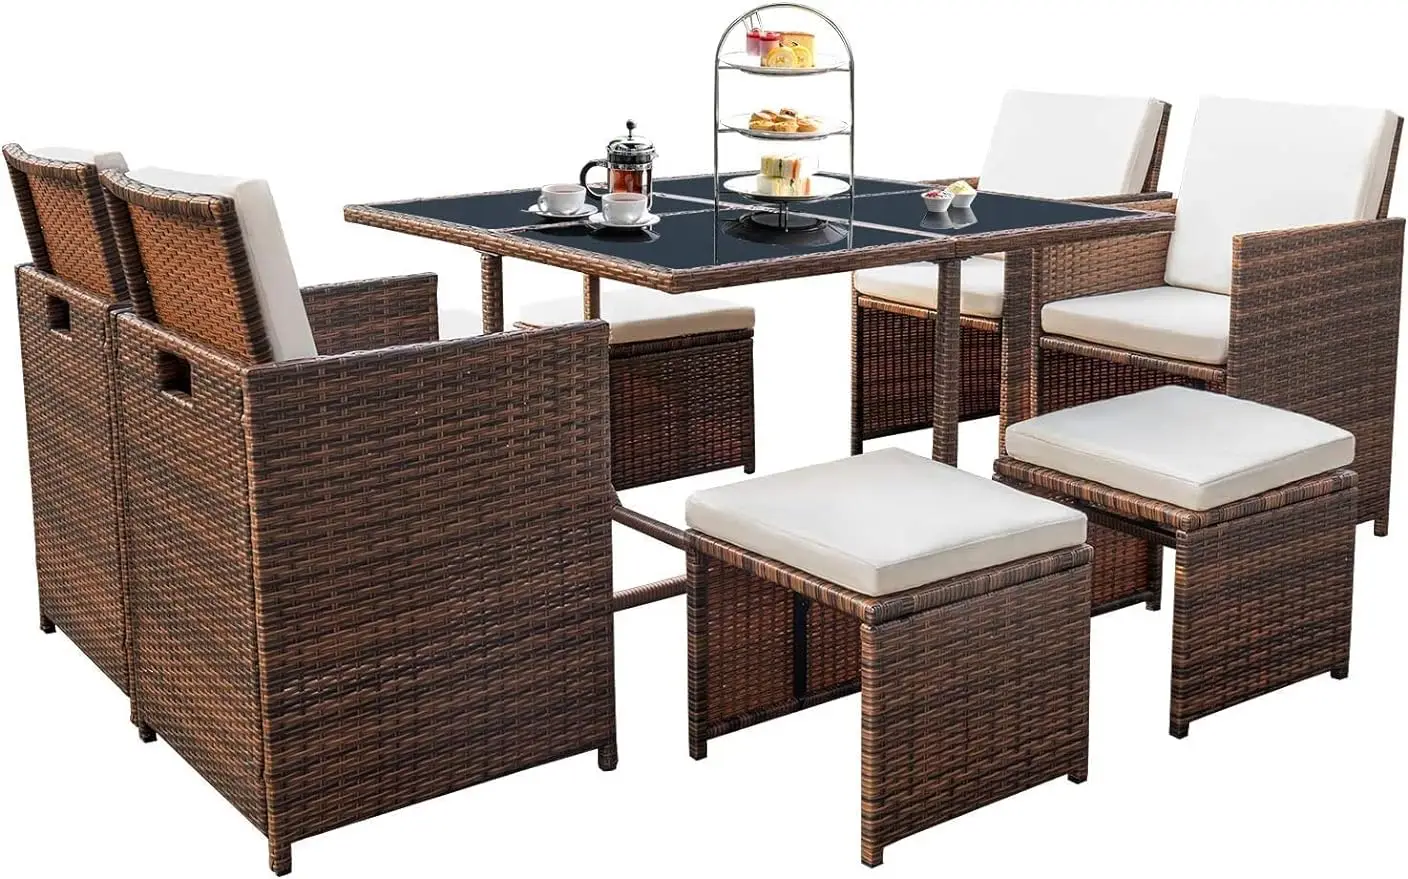 

9 Pieces Patio Dining Sets Outdoor Space Saving Rattan Chairs with Glass Table Patio Furniture Sets Cushioned Seating